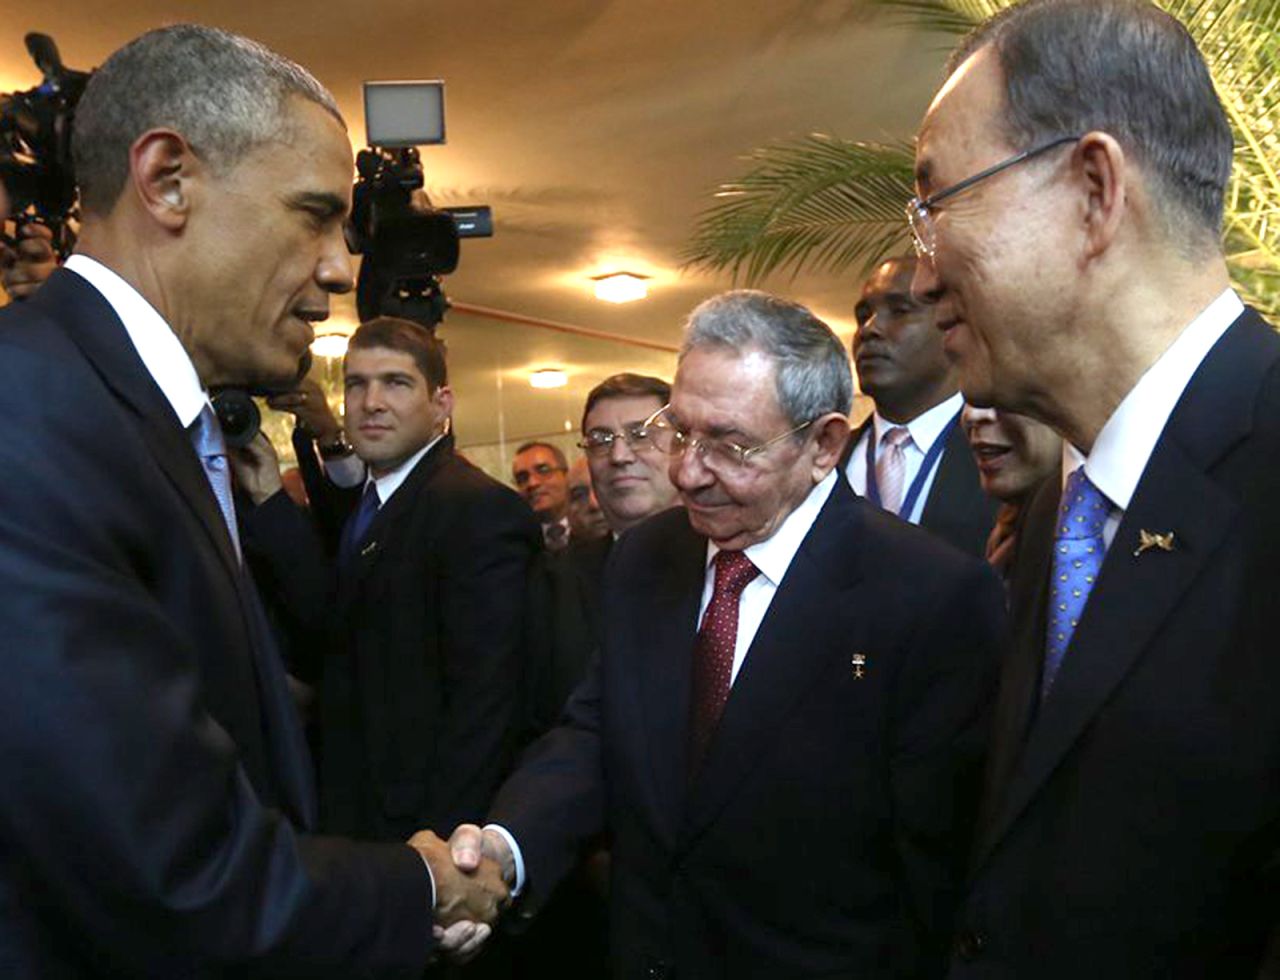 Obama greets Castro briefly on Friday, April 10, at a dinner for Latin American leaders at the Summit of the Americas. It was a <a href="http://www.cnn.com/2015/04/10/politics/obama-raul-castro-panama-cuba/index.html">handshake that shook the Western Hemisphere</a>.